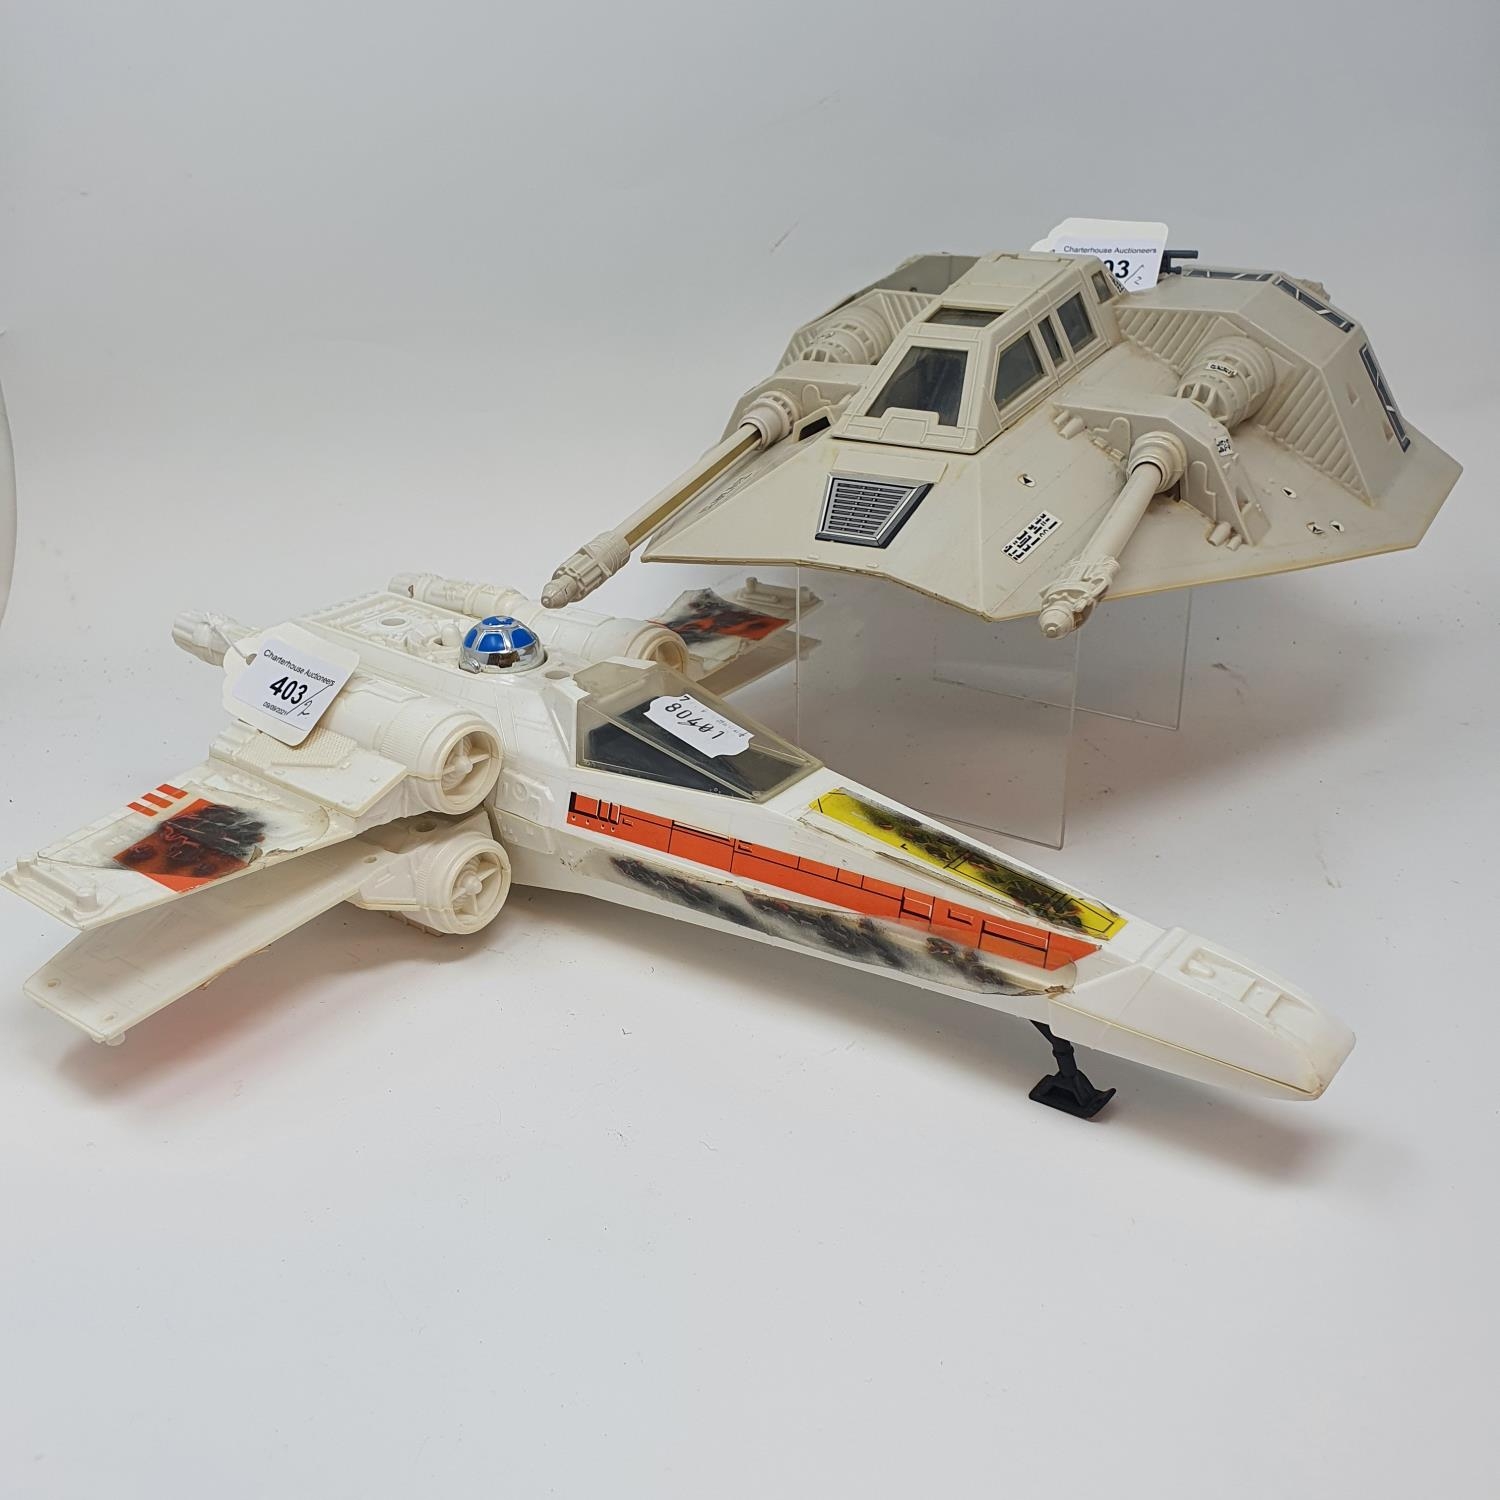 A Star Wars Hoth Snow Speeder, and an x wing (2) Snow Speeder lacking top of battery cover and